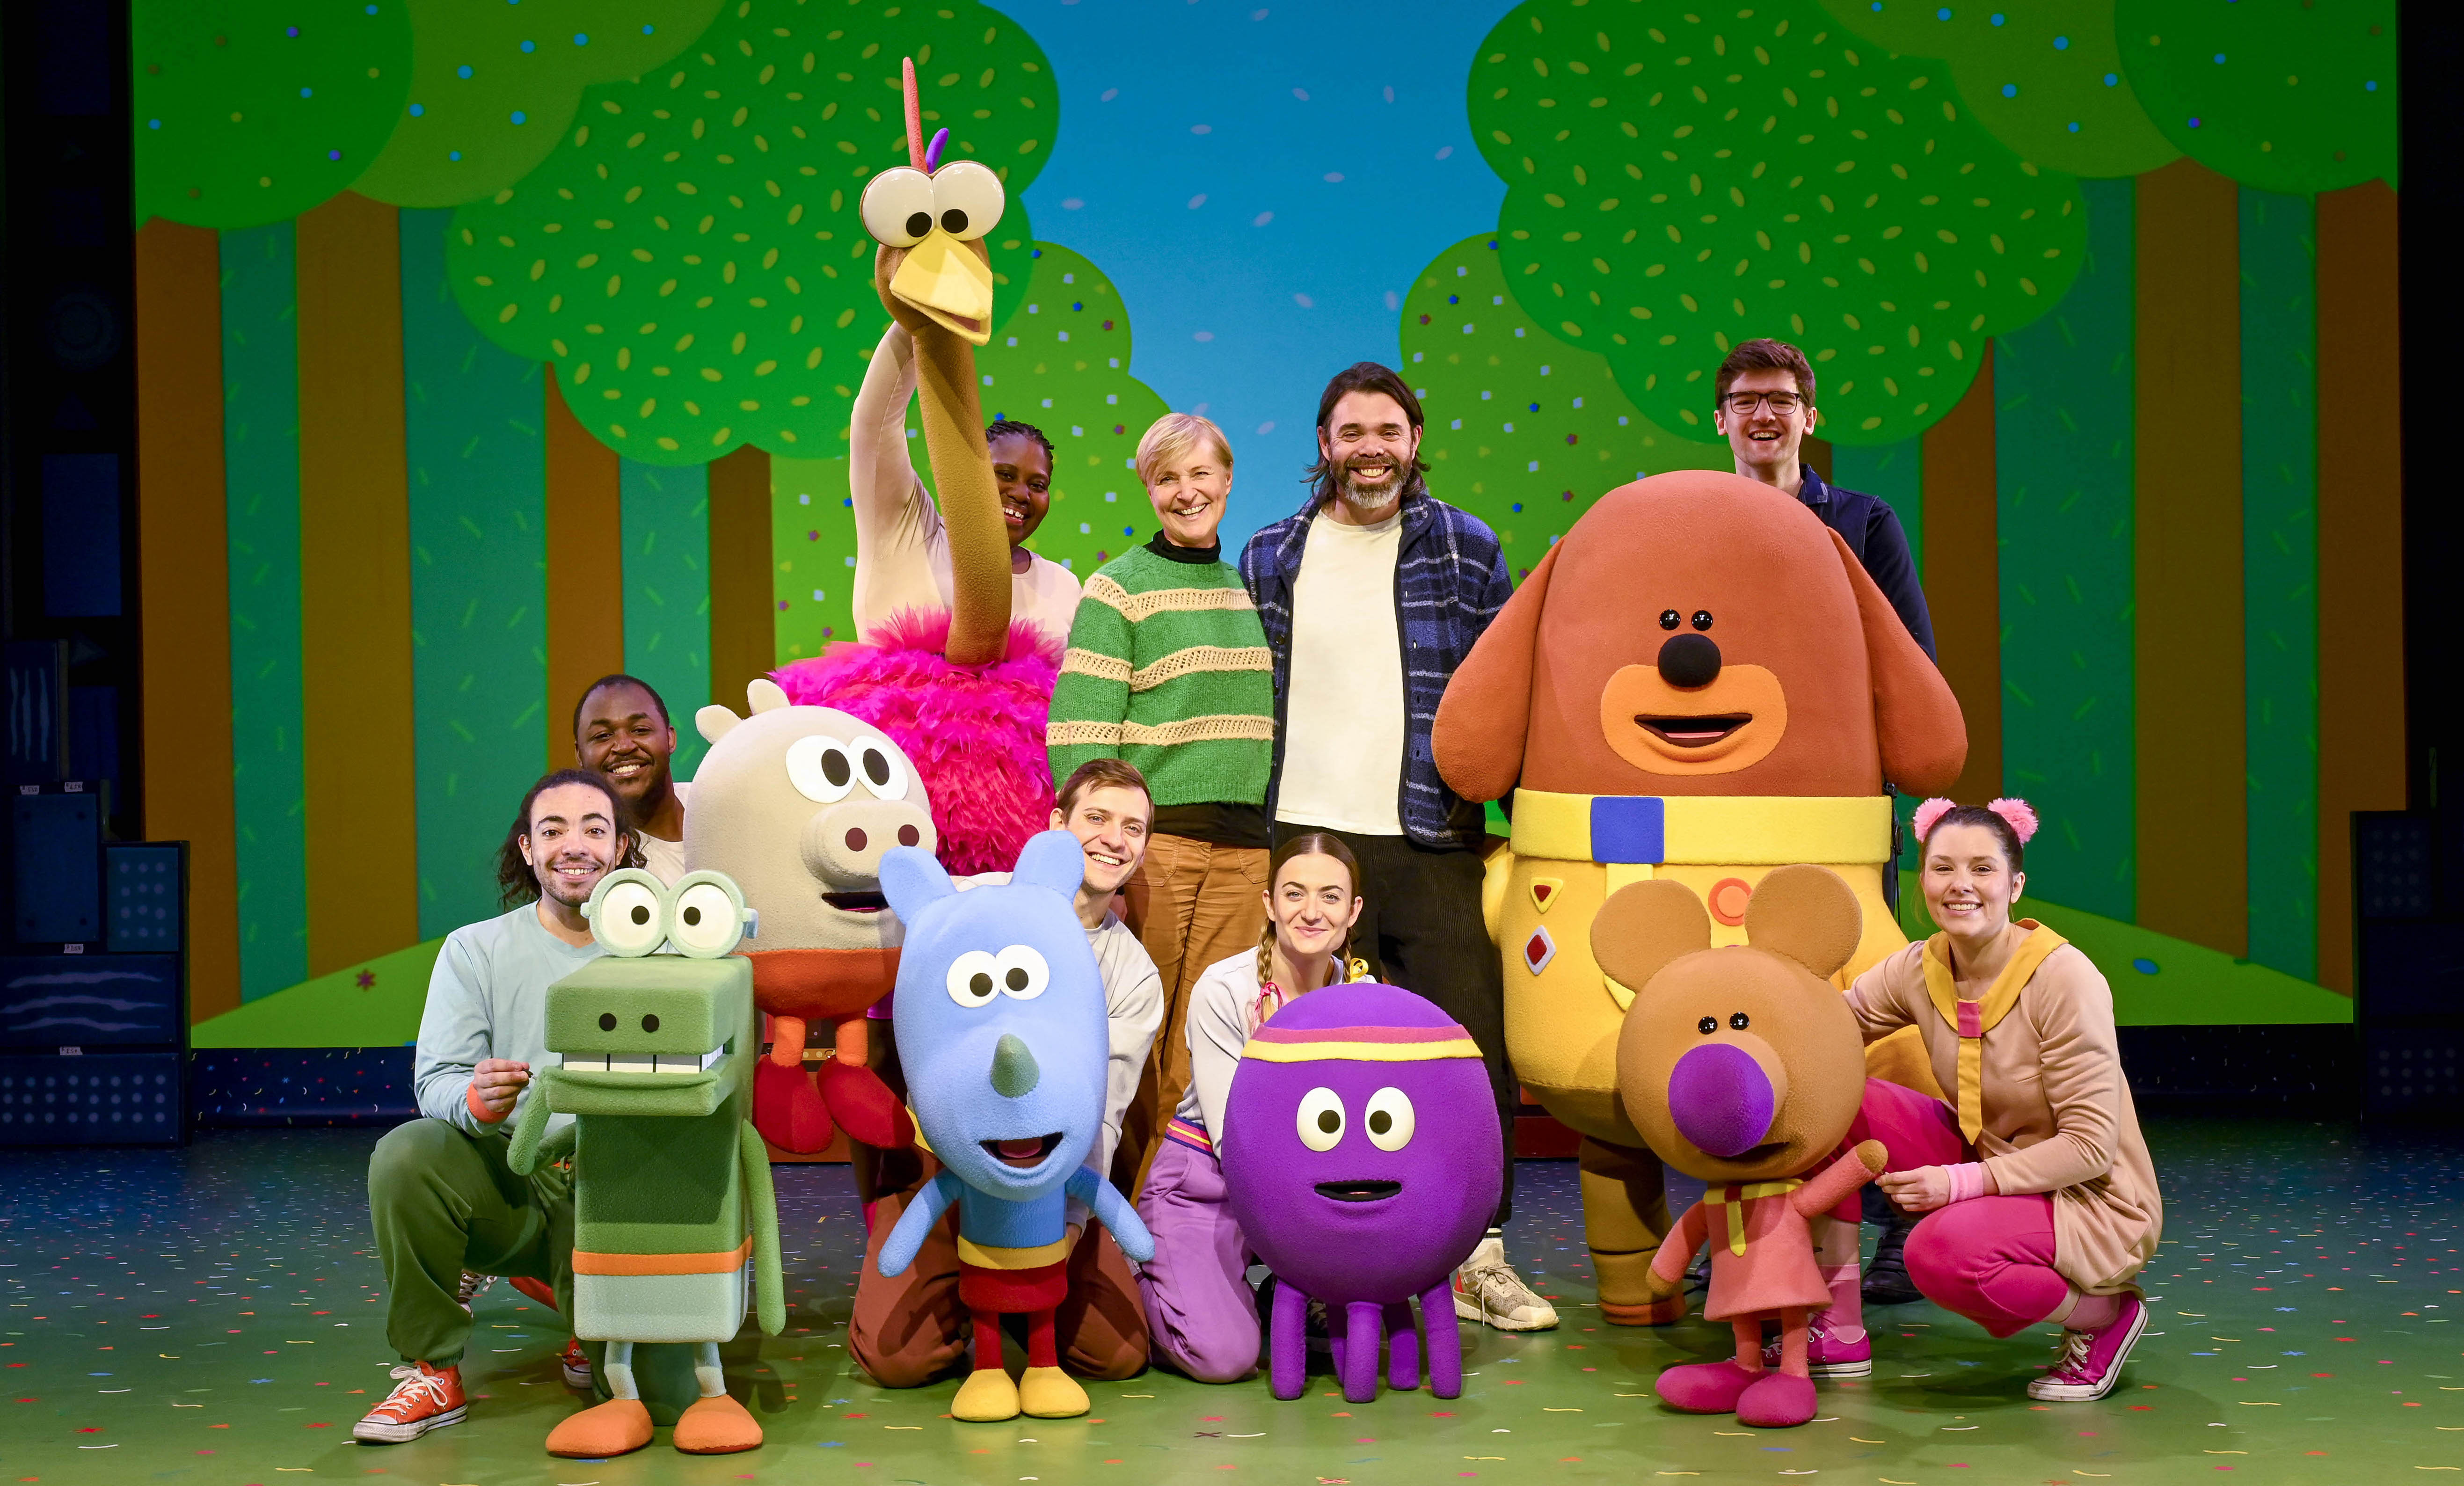 Hey Duggee with Cast, Grant Orchard Creator and Sue Goffe on set.